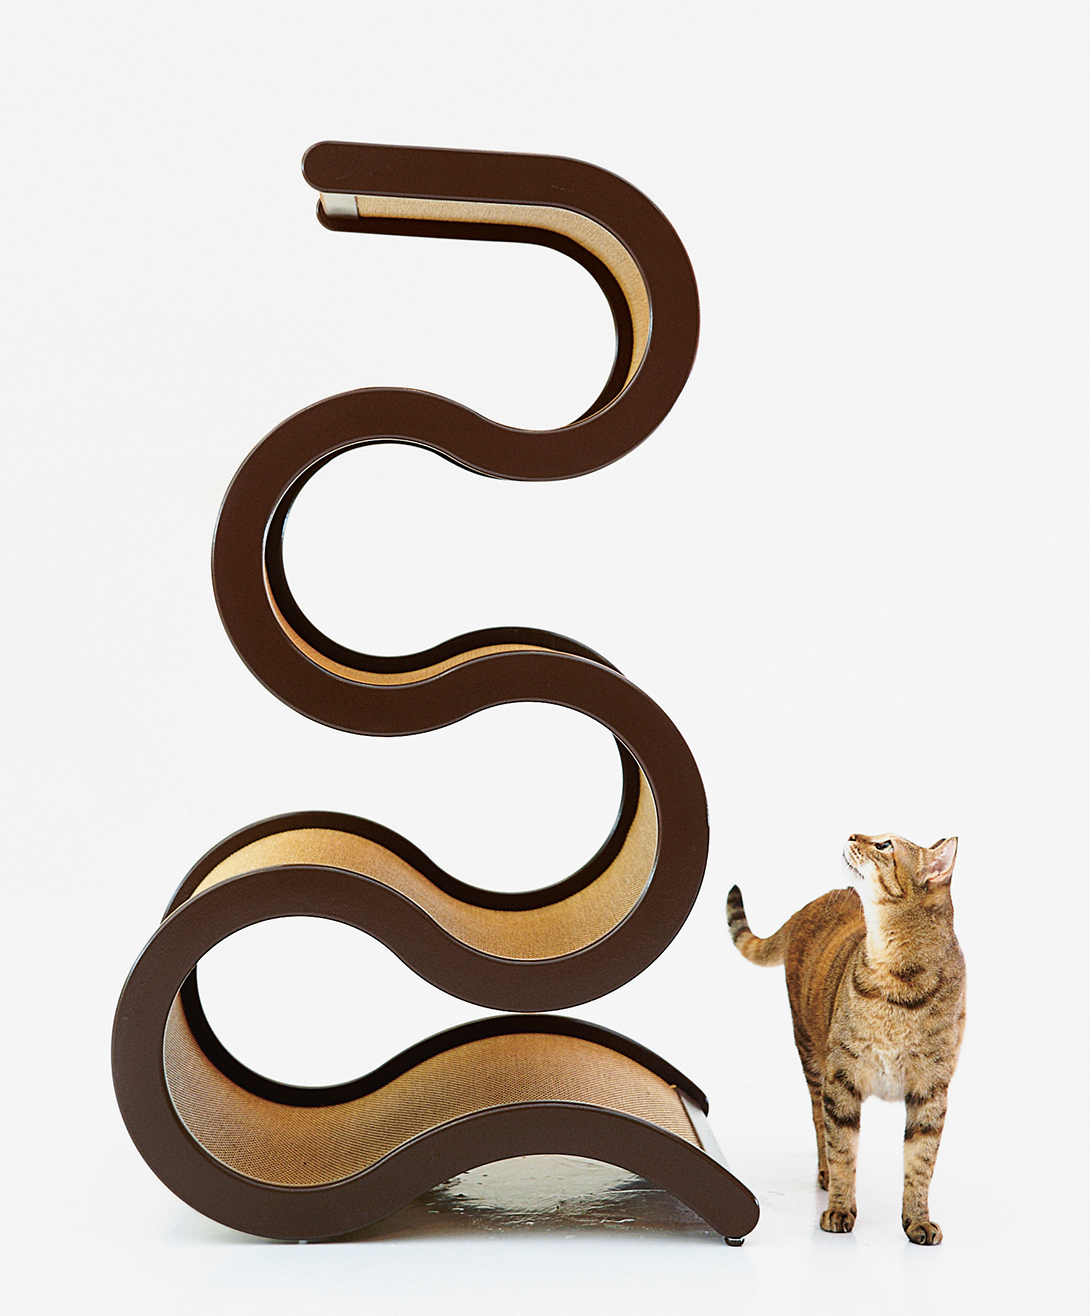 Curvynest Cat Tree by Catswall Design from Pet-tecture